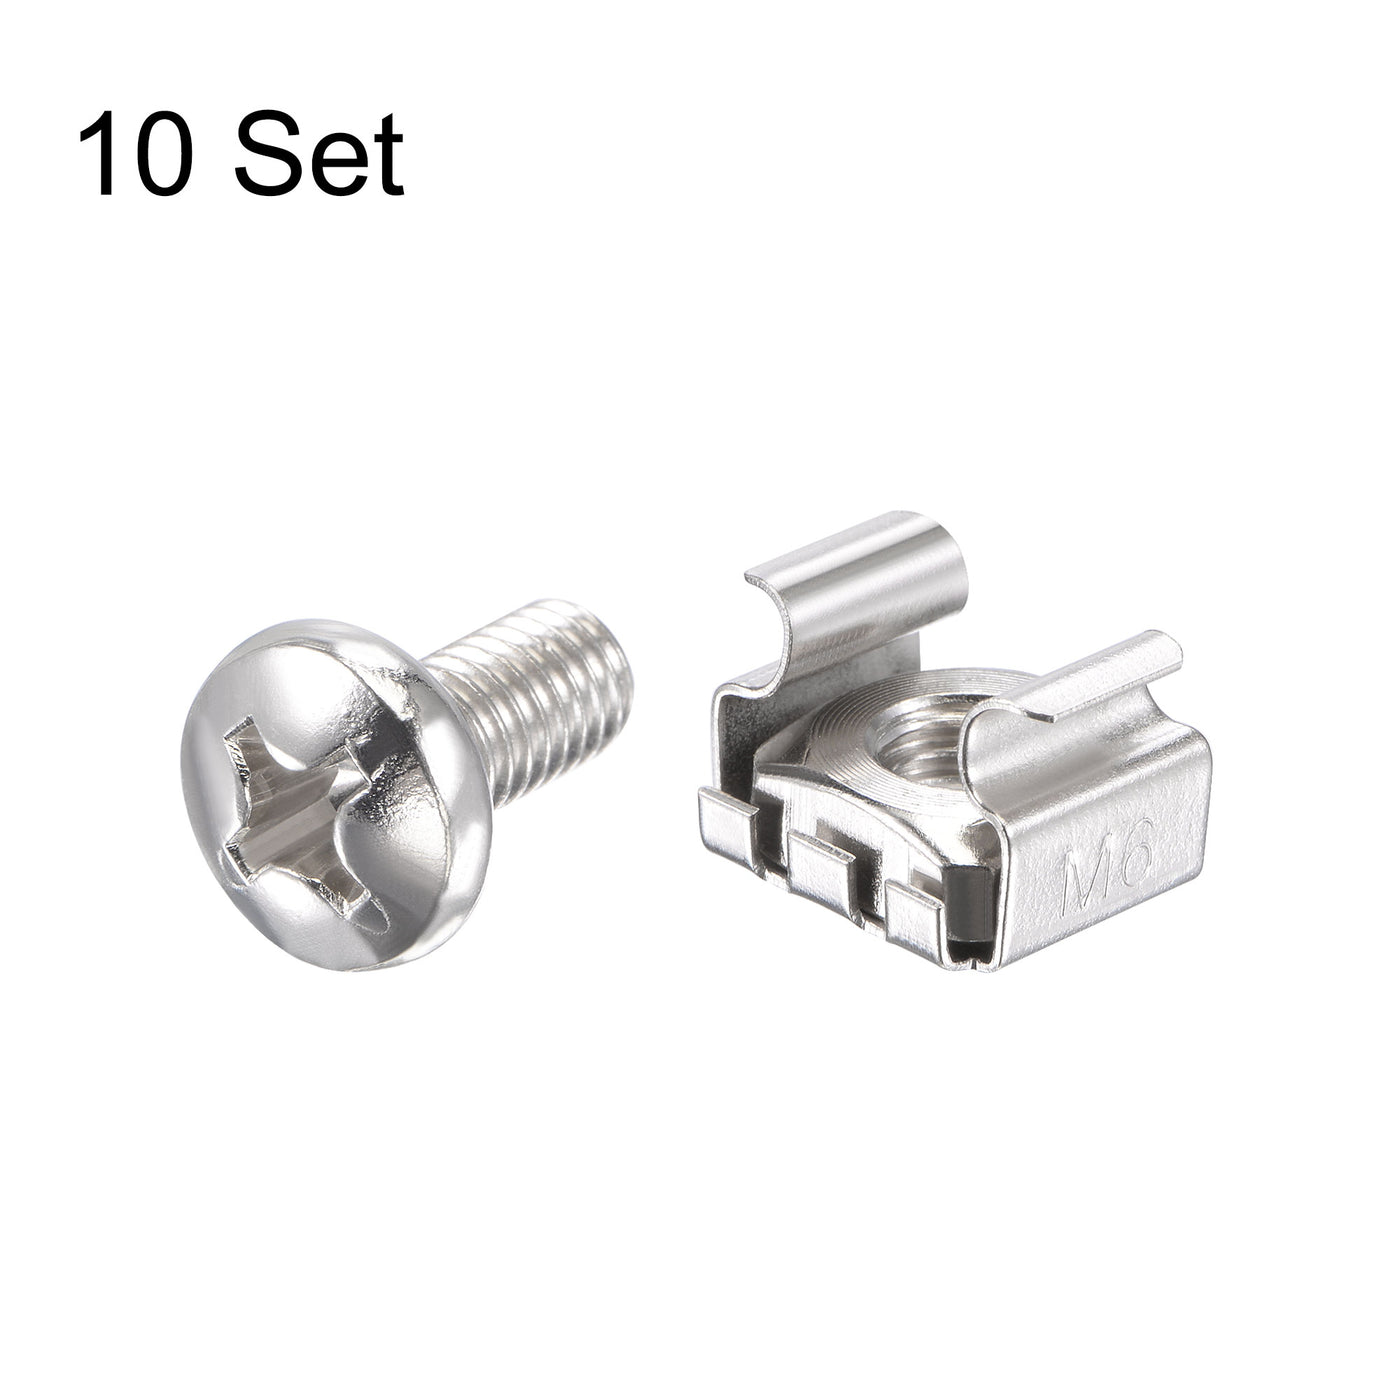 uxcell Uxcell Rack Screws, M6x12mm Screws and Cage Nuts 10Set for Server Shelf Rack